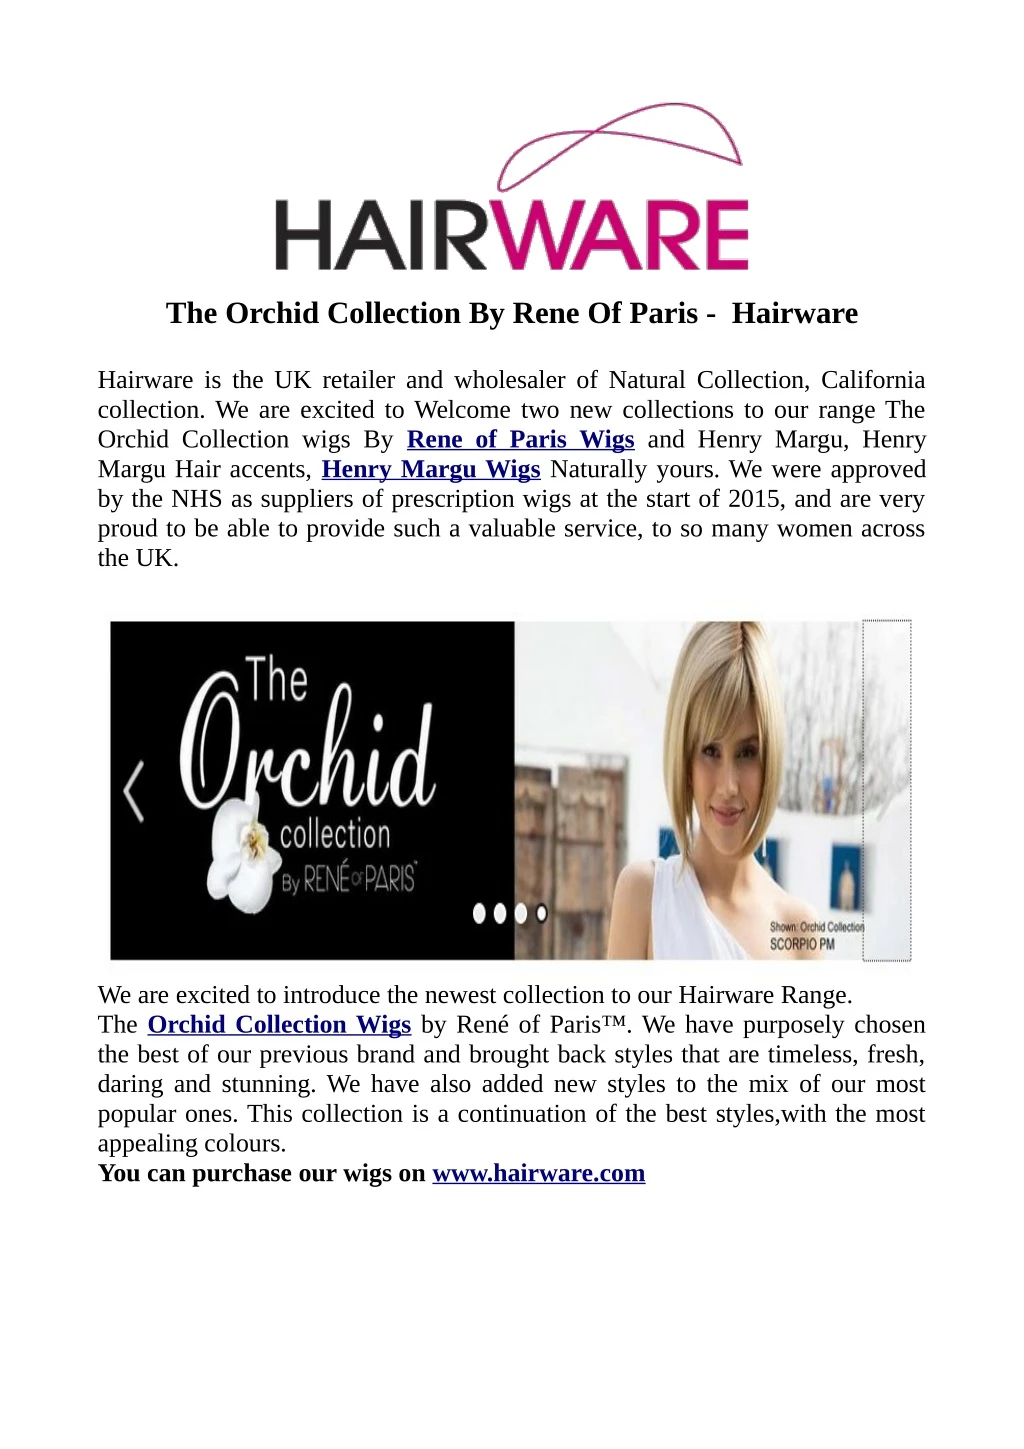 the orchid collection by rene of paris hairware